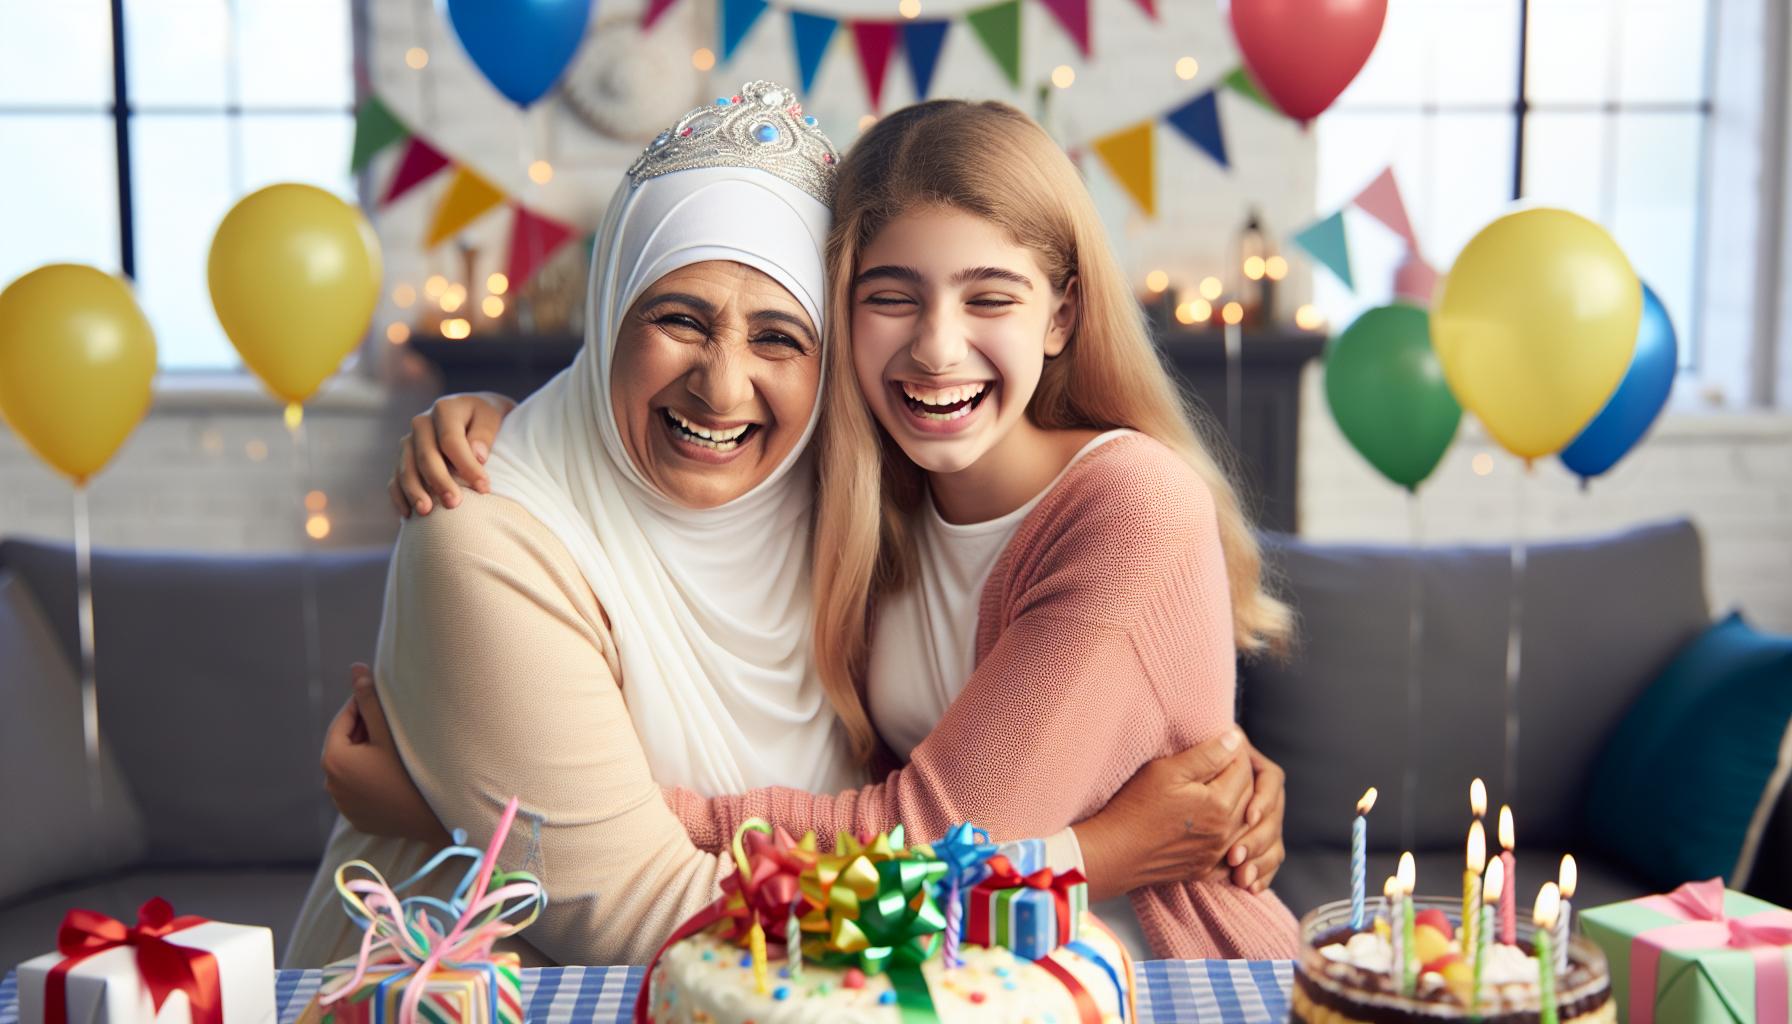 Aunt's Guide to Uplifting Birthday Wishes for Your Niece